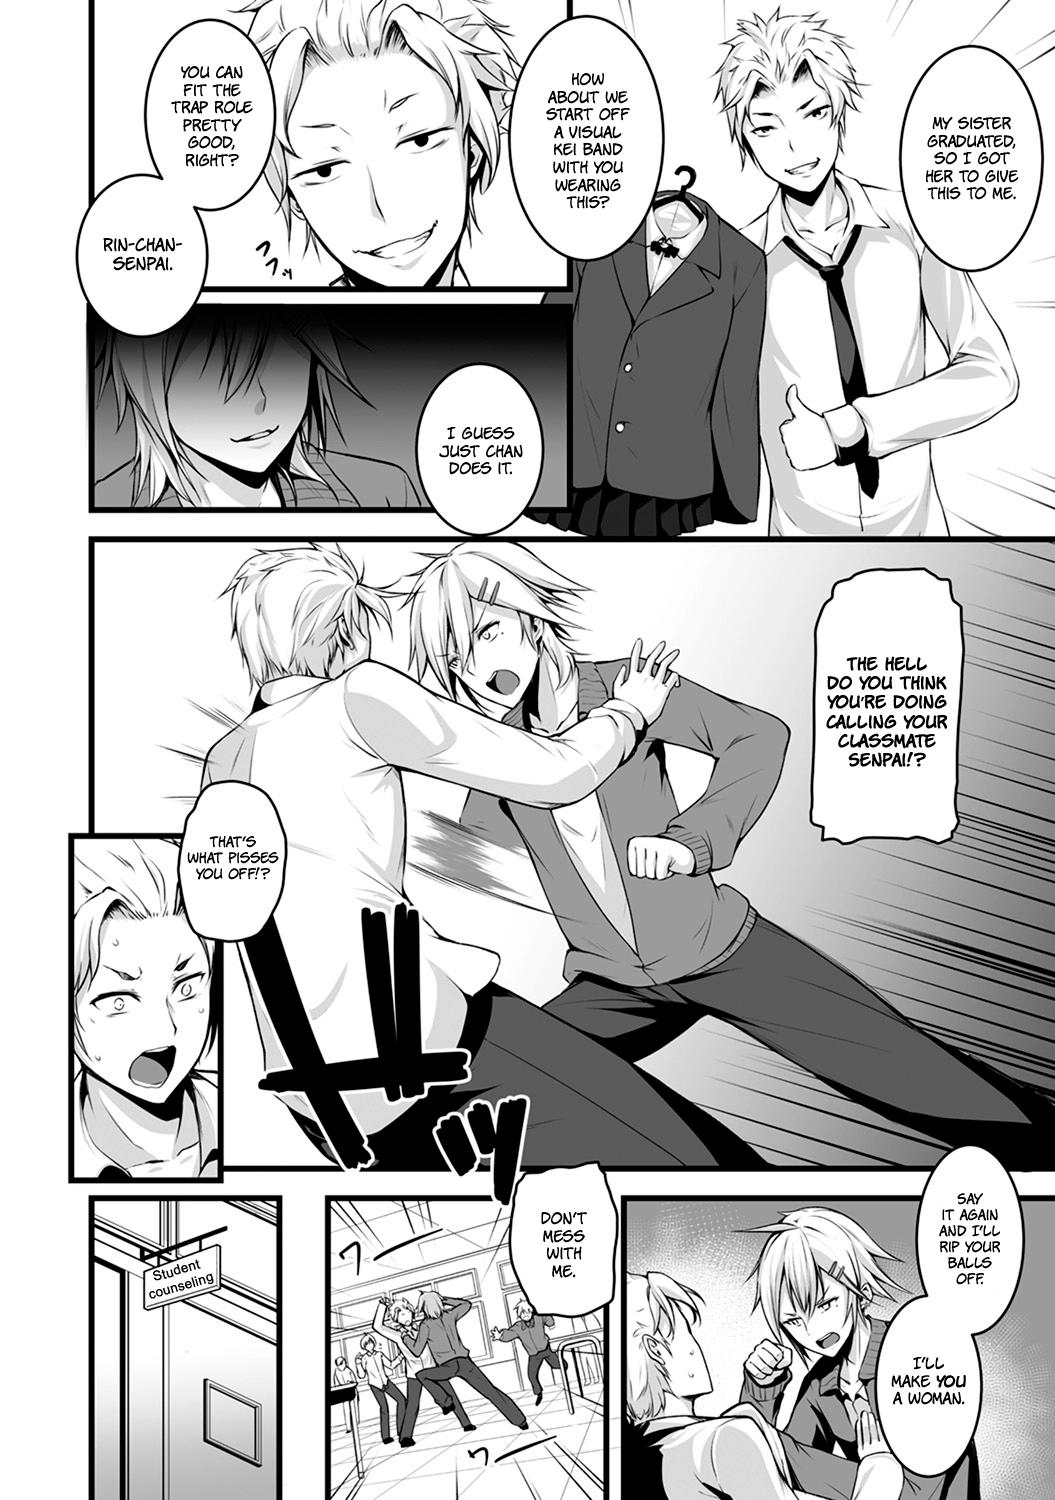 Spying Ore wa Kyou kara Cinderella Aite wa Otoko. Ore wa Onna!? | From now on, I’m Cinderella. My Partner is a Man and I’m a Woman!? Ch. 1-2 Breast - Page 3